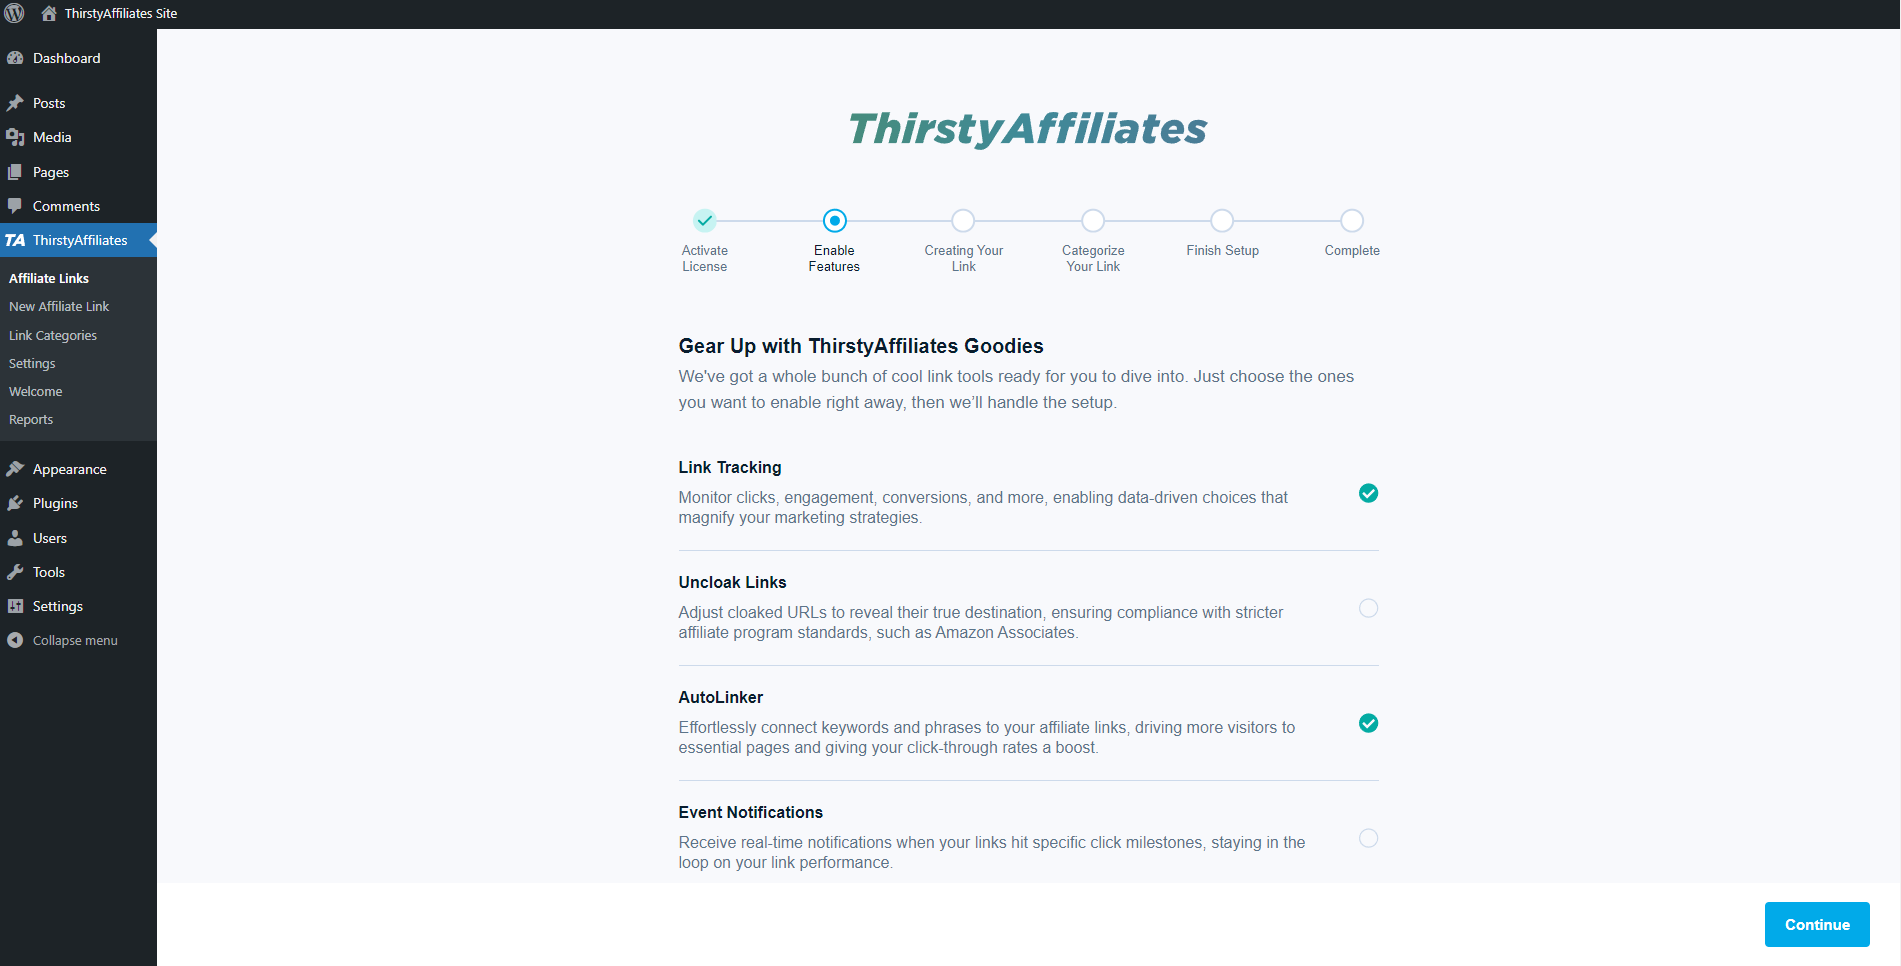 ThirstyAffiliates - License Activated